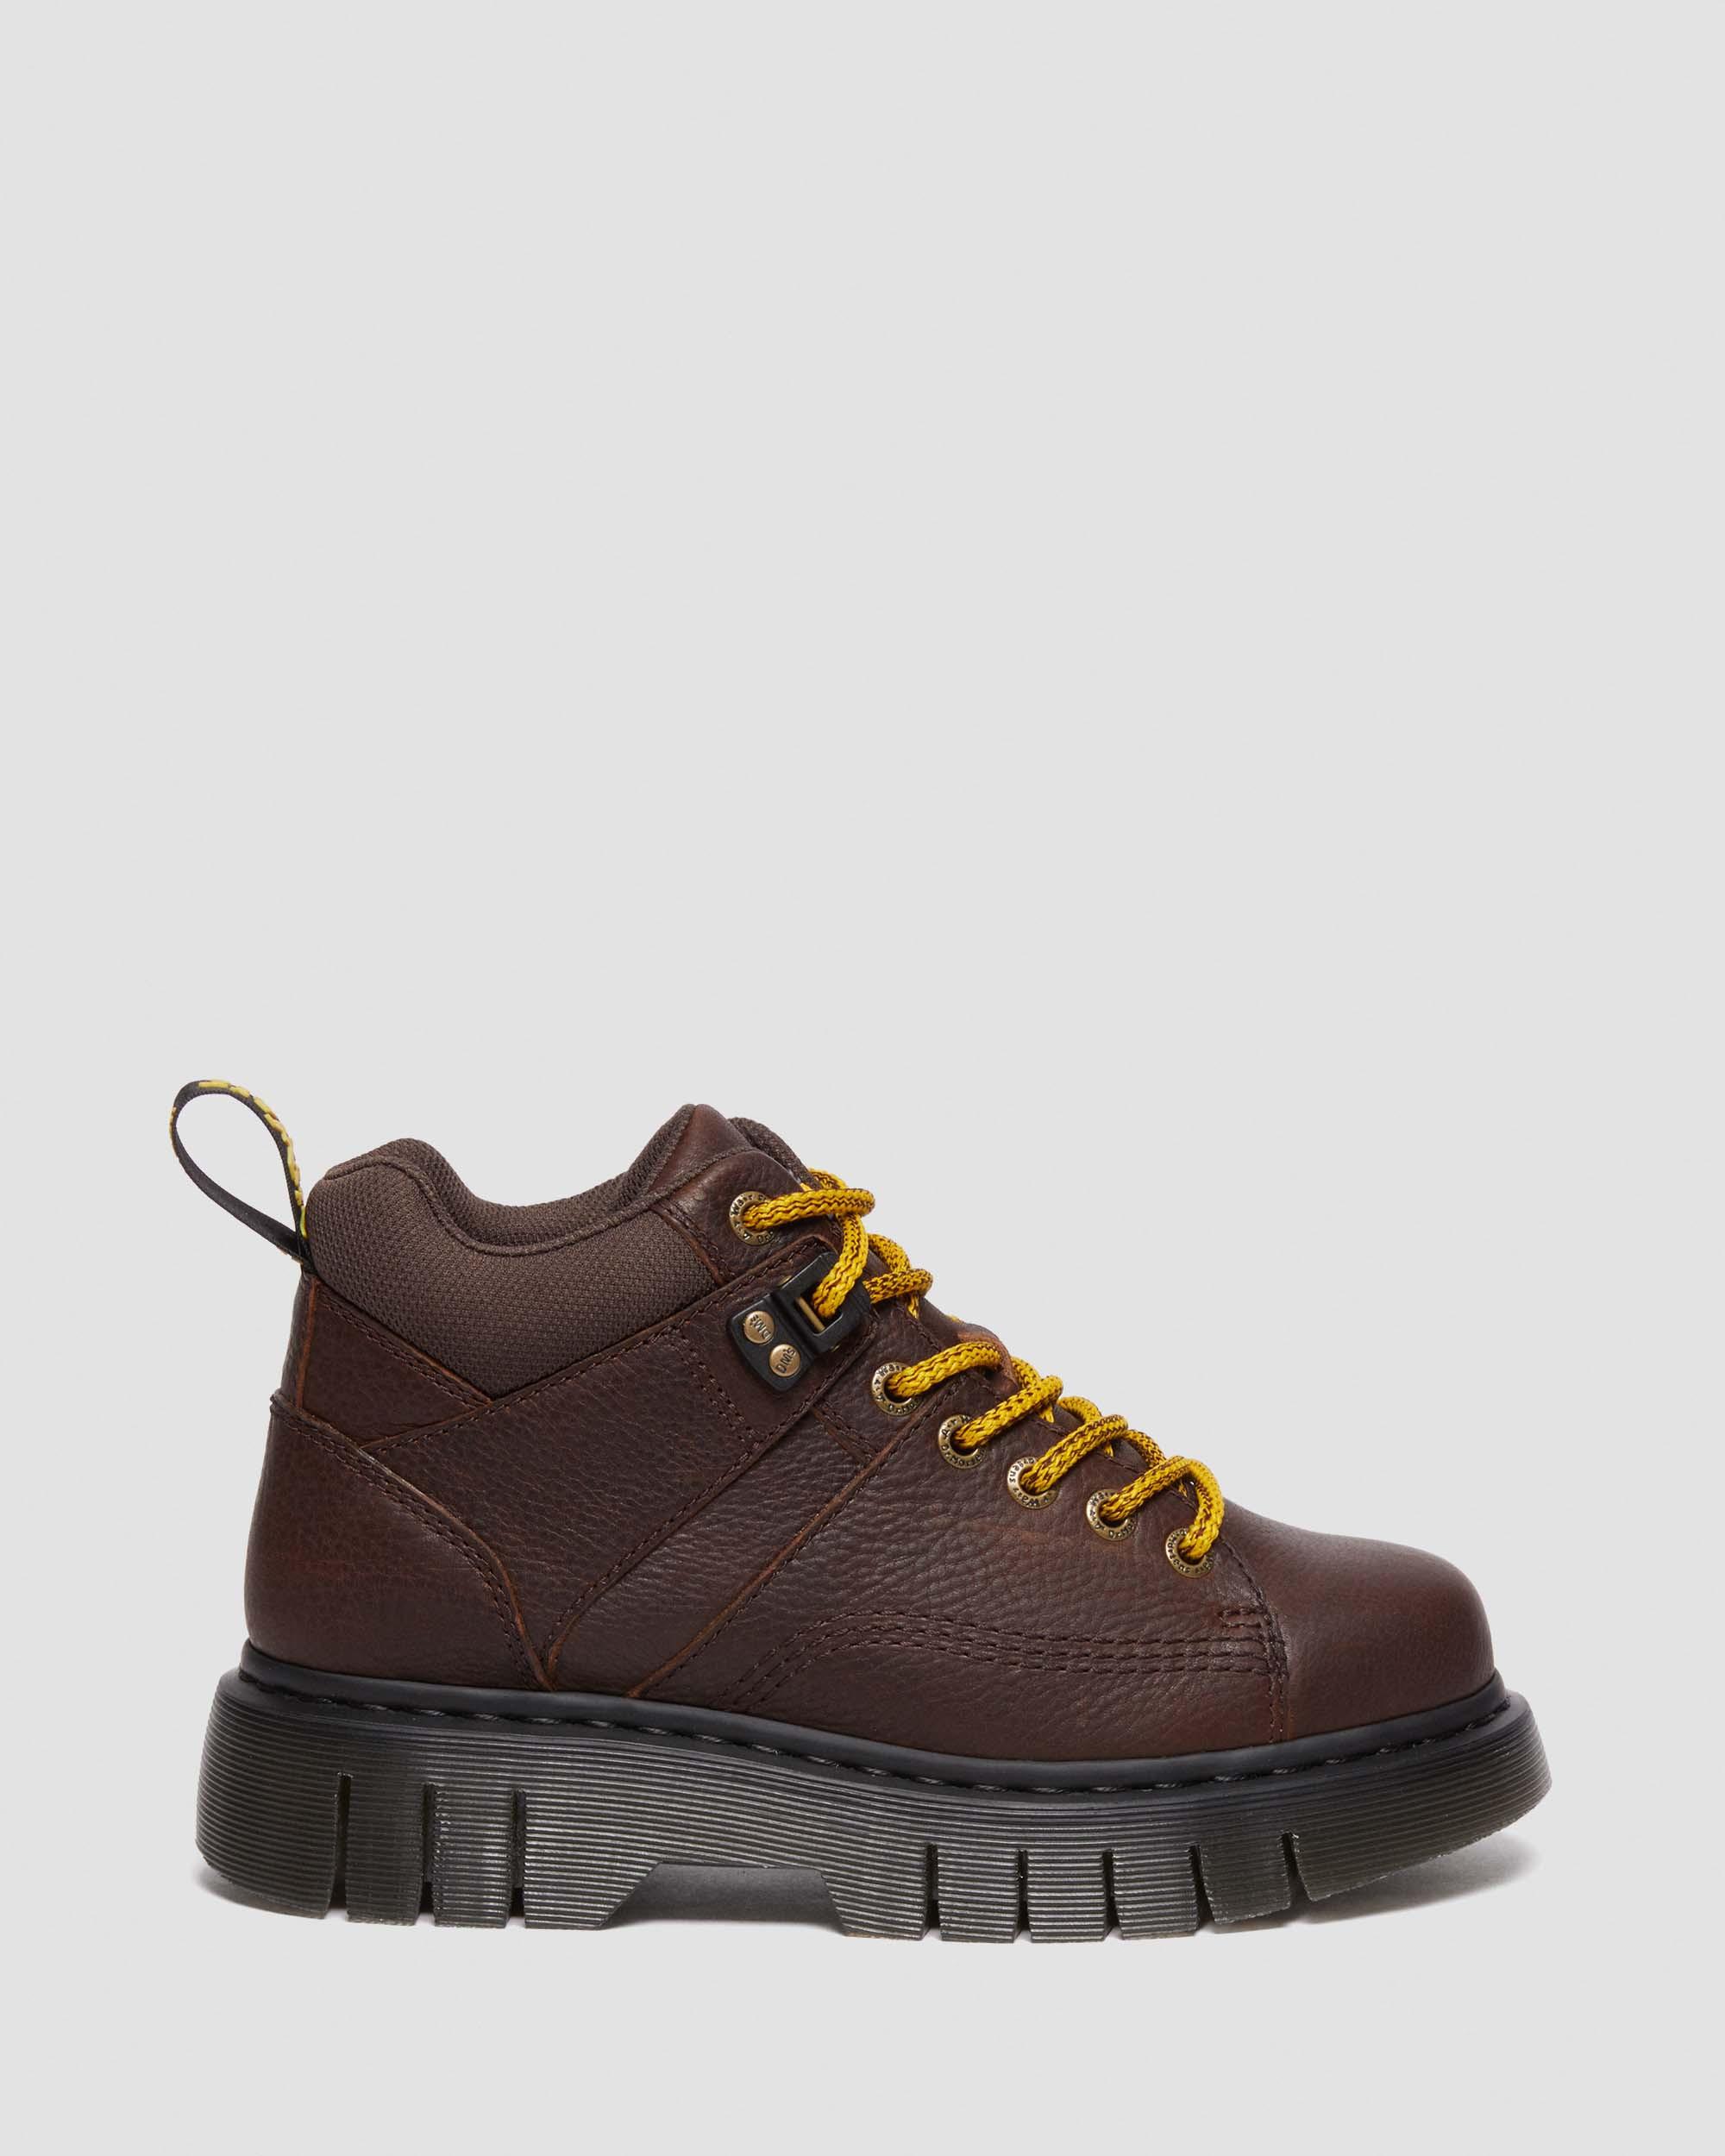 Woodard Leather Lace Up Ankle Boots Dark BrownWoodard Leather Lace Up Ankle Boots Dr. Martens